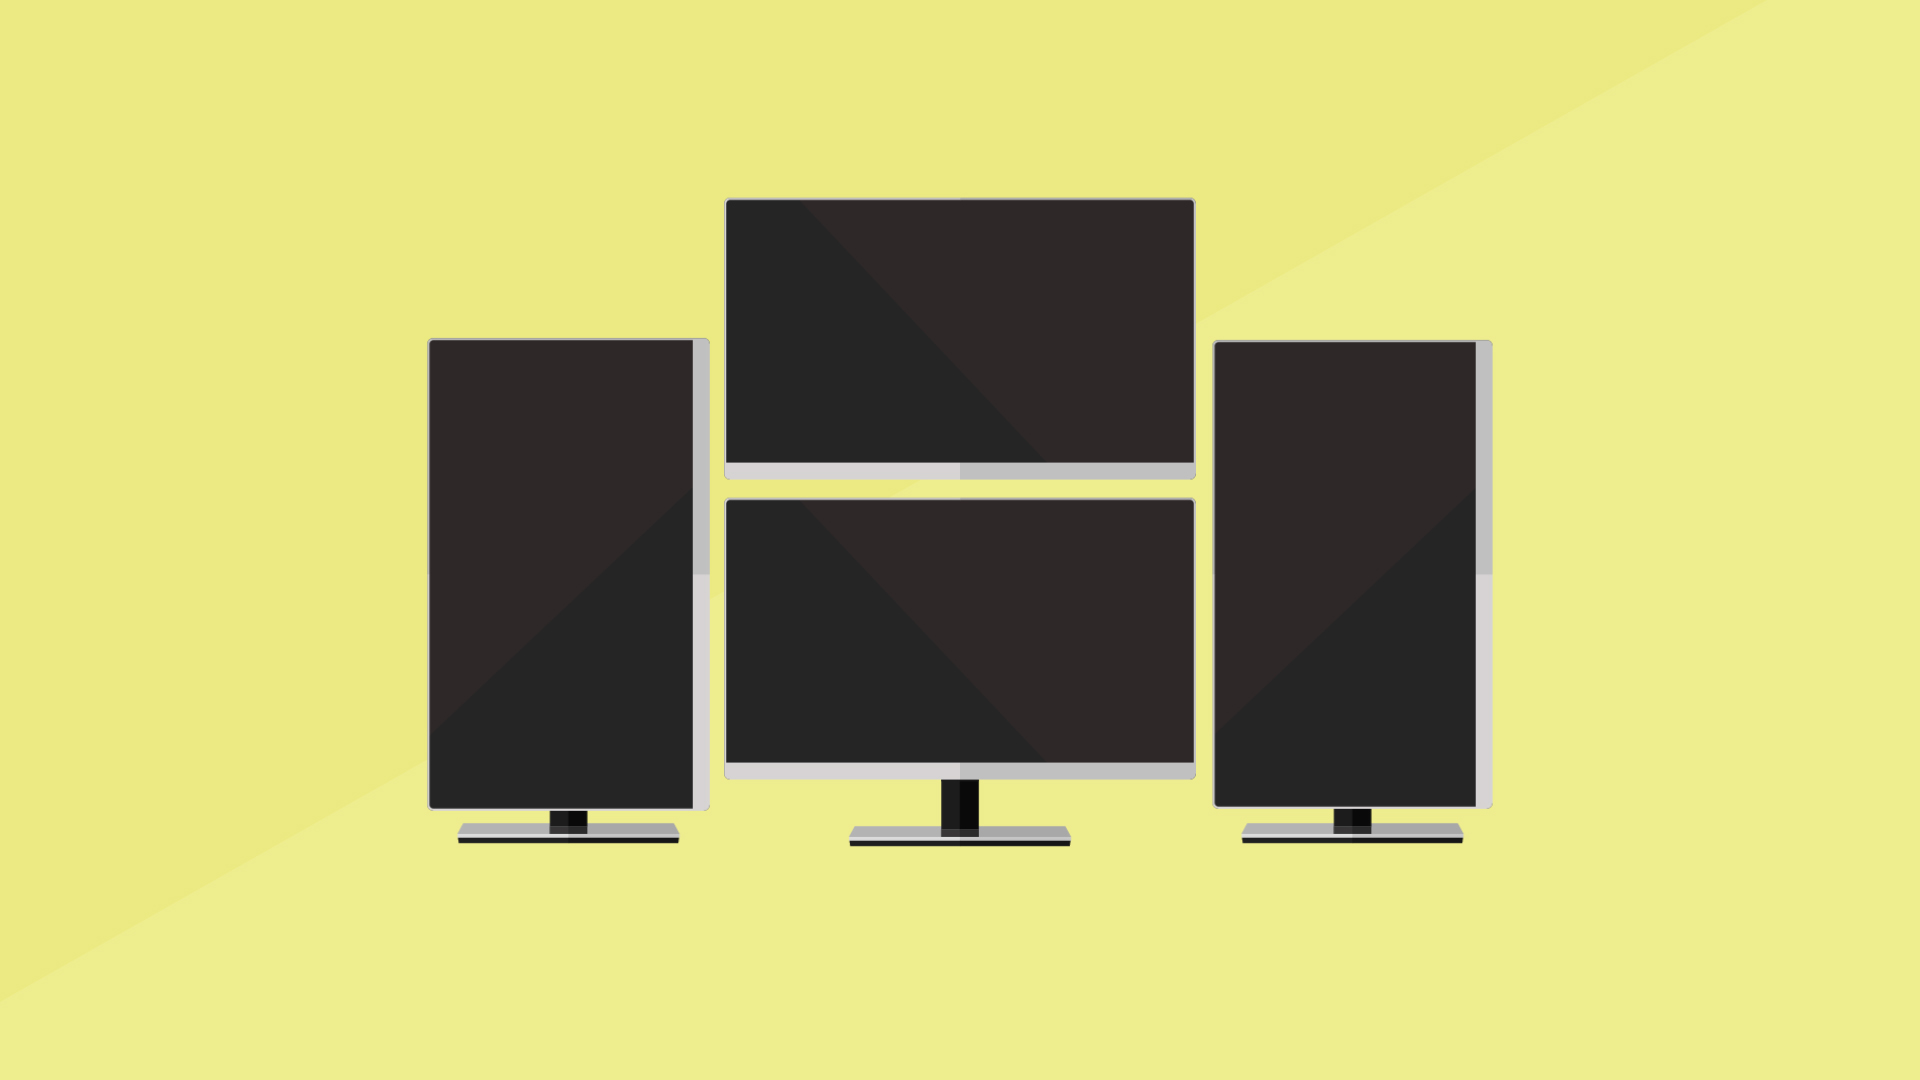 Four computer monitors shown in a graphic